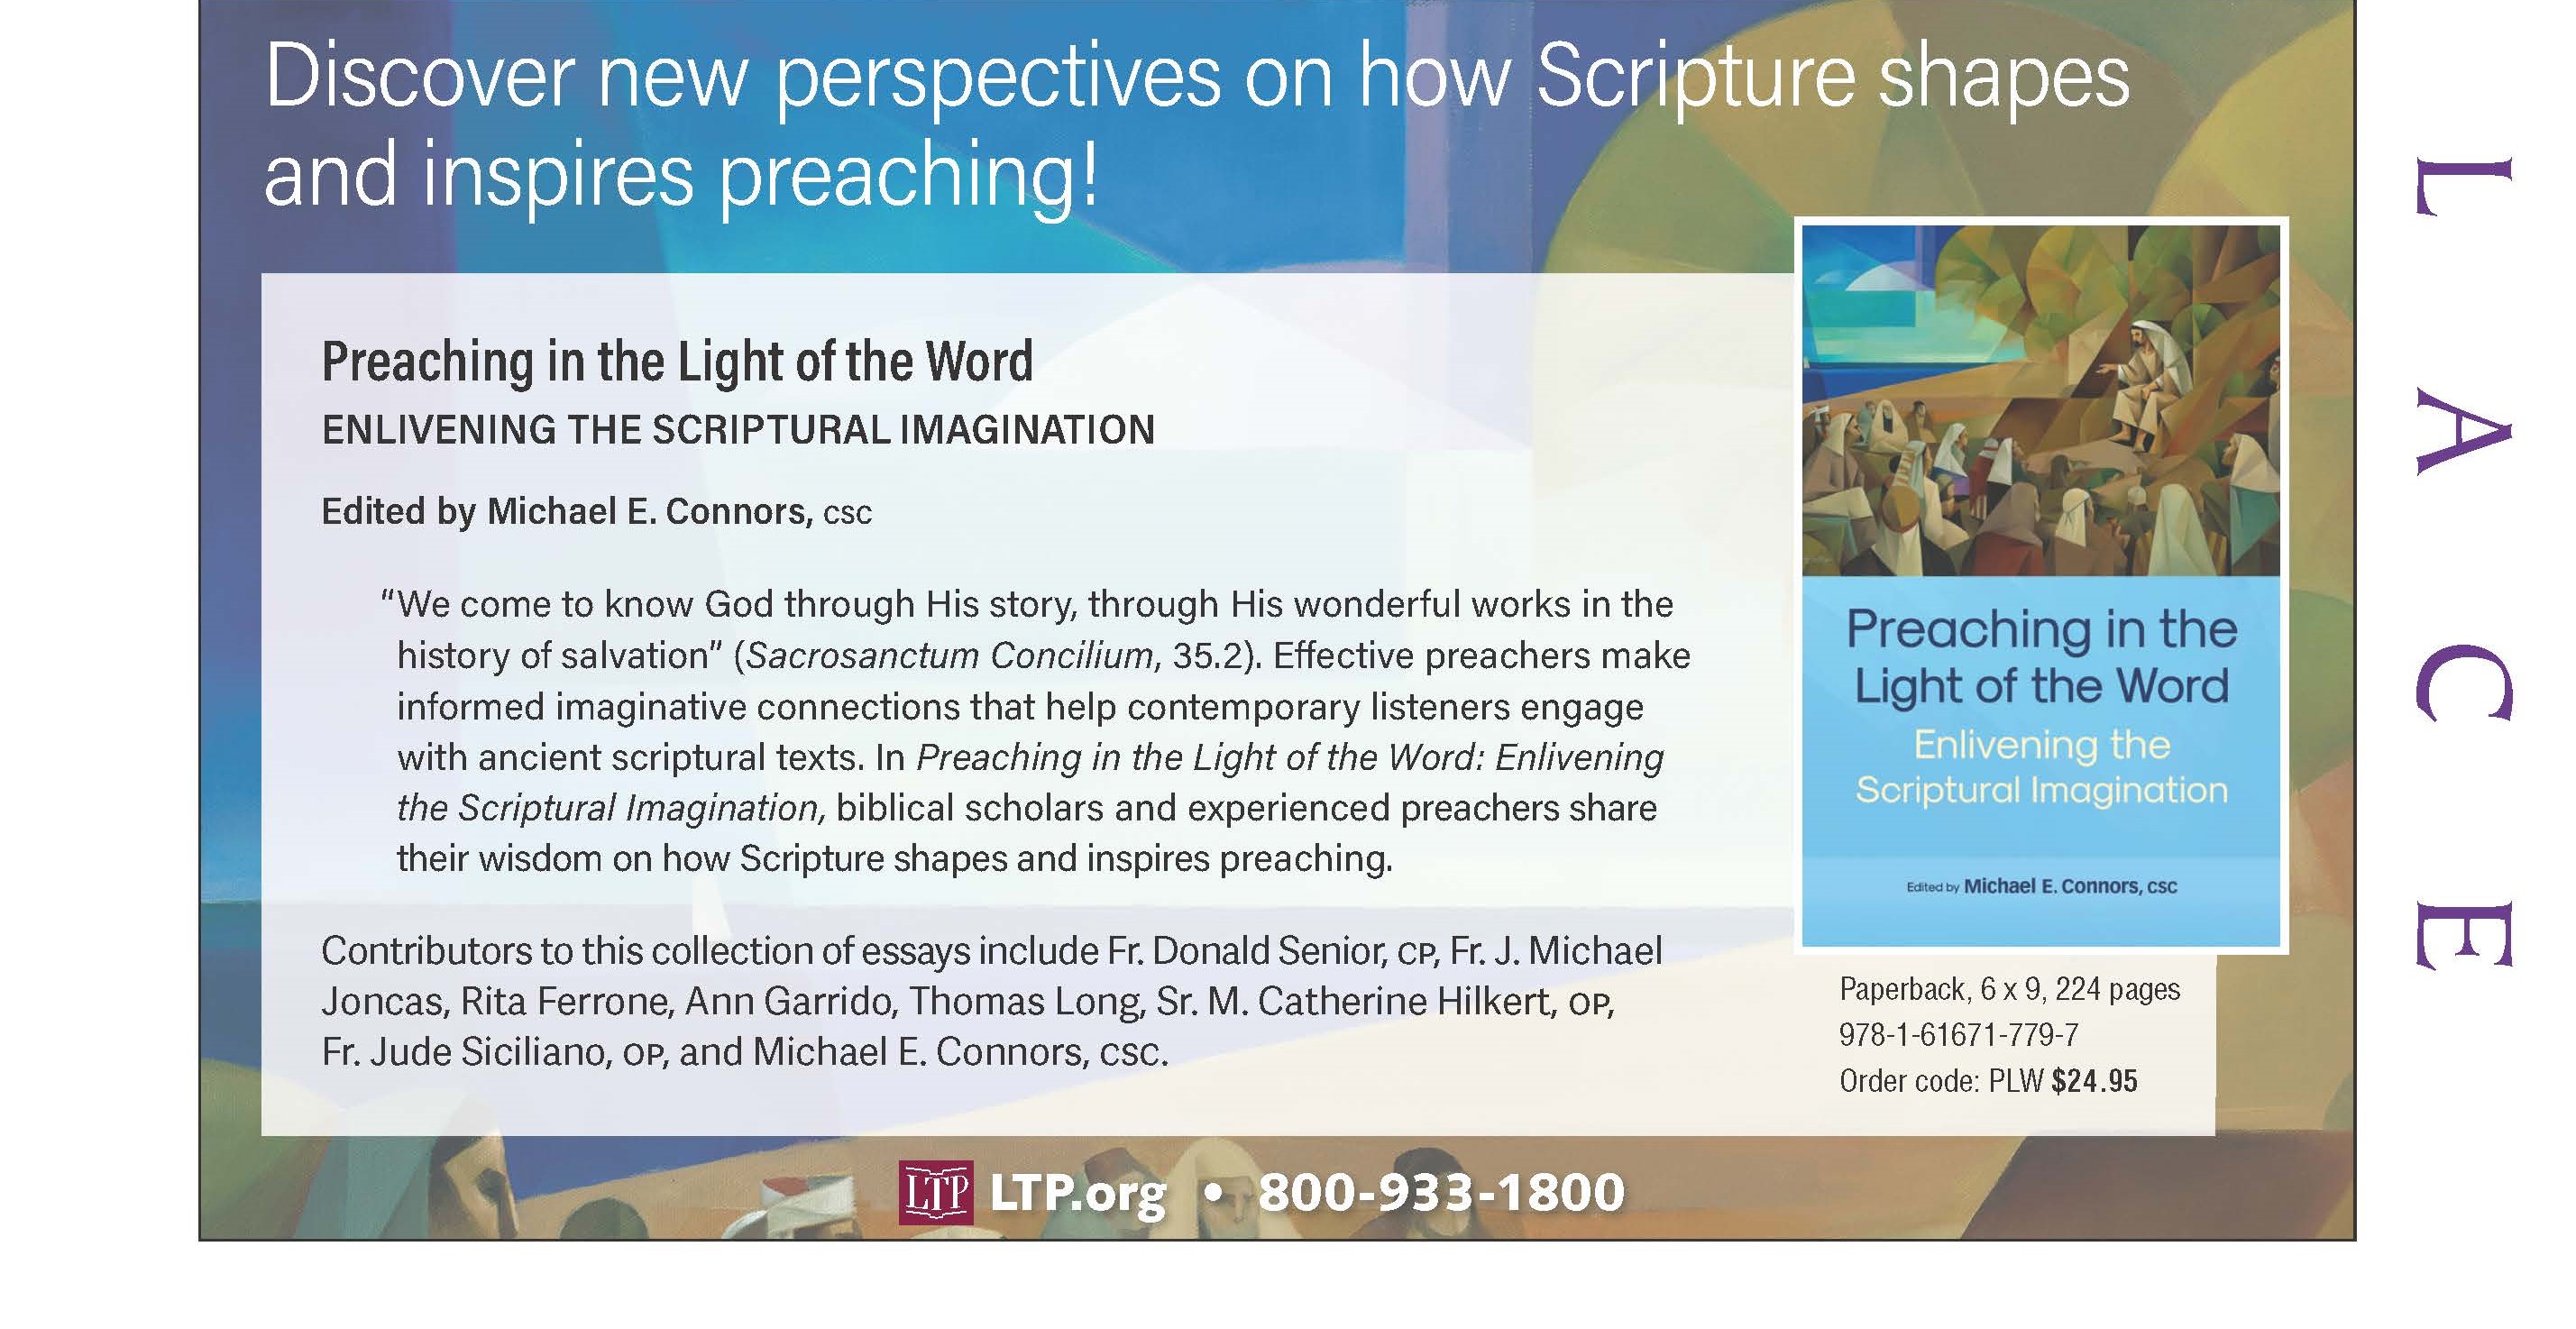 Go to https://ltp.org/products/details/PLW/preaching-in-the-light-of-the-word